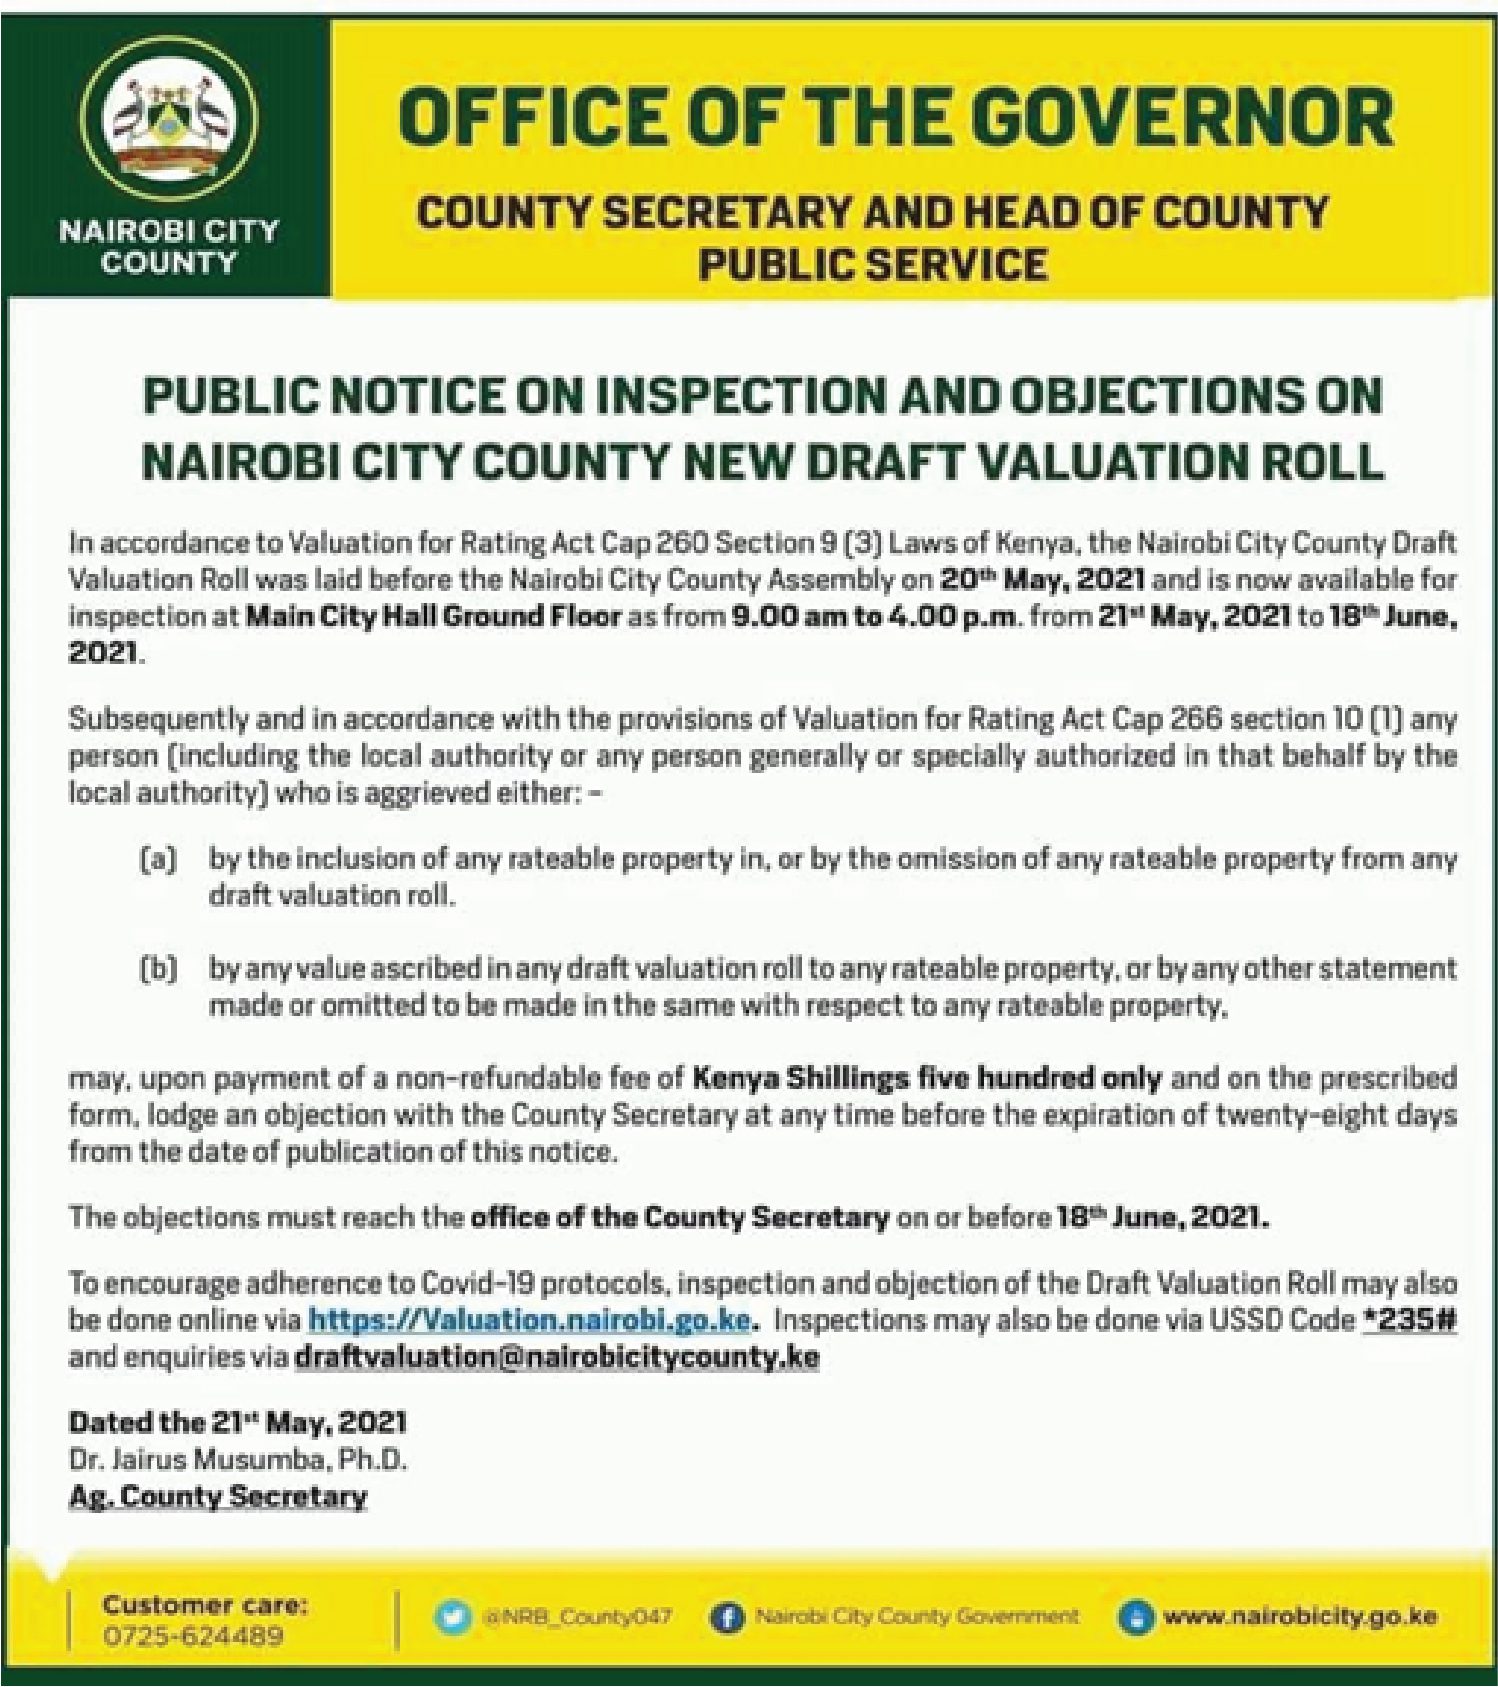 Inspection & objections on Nairobi city county new draft valuation roll